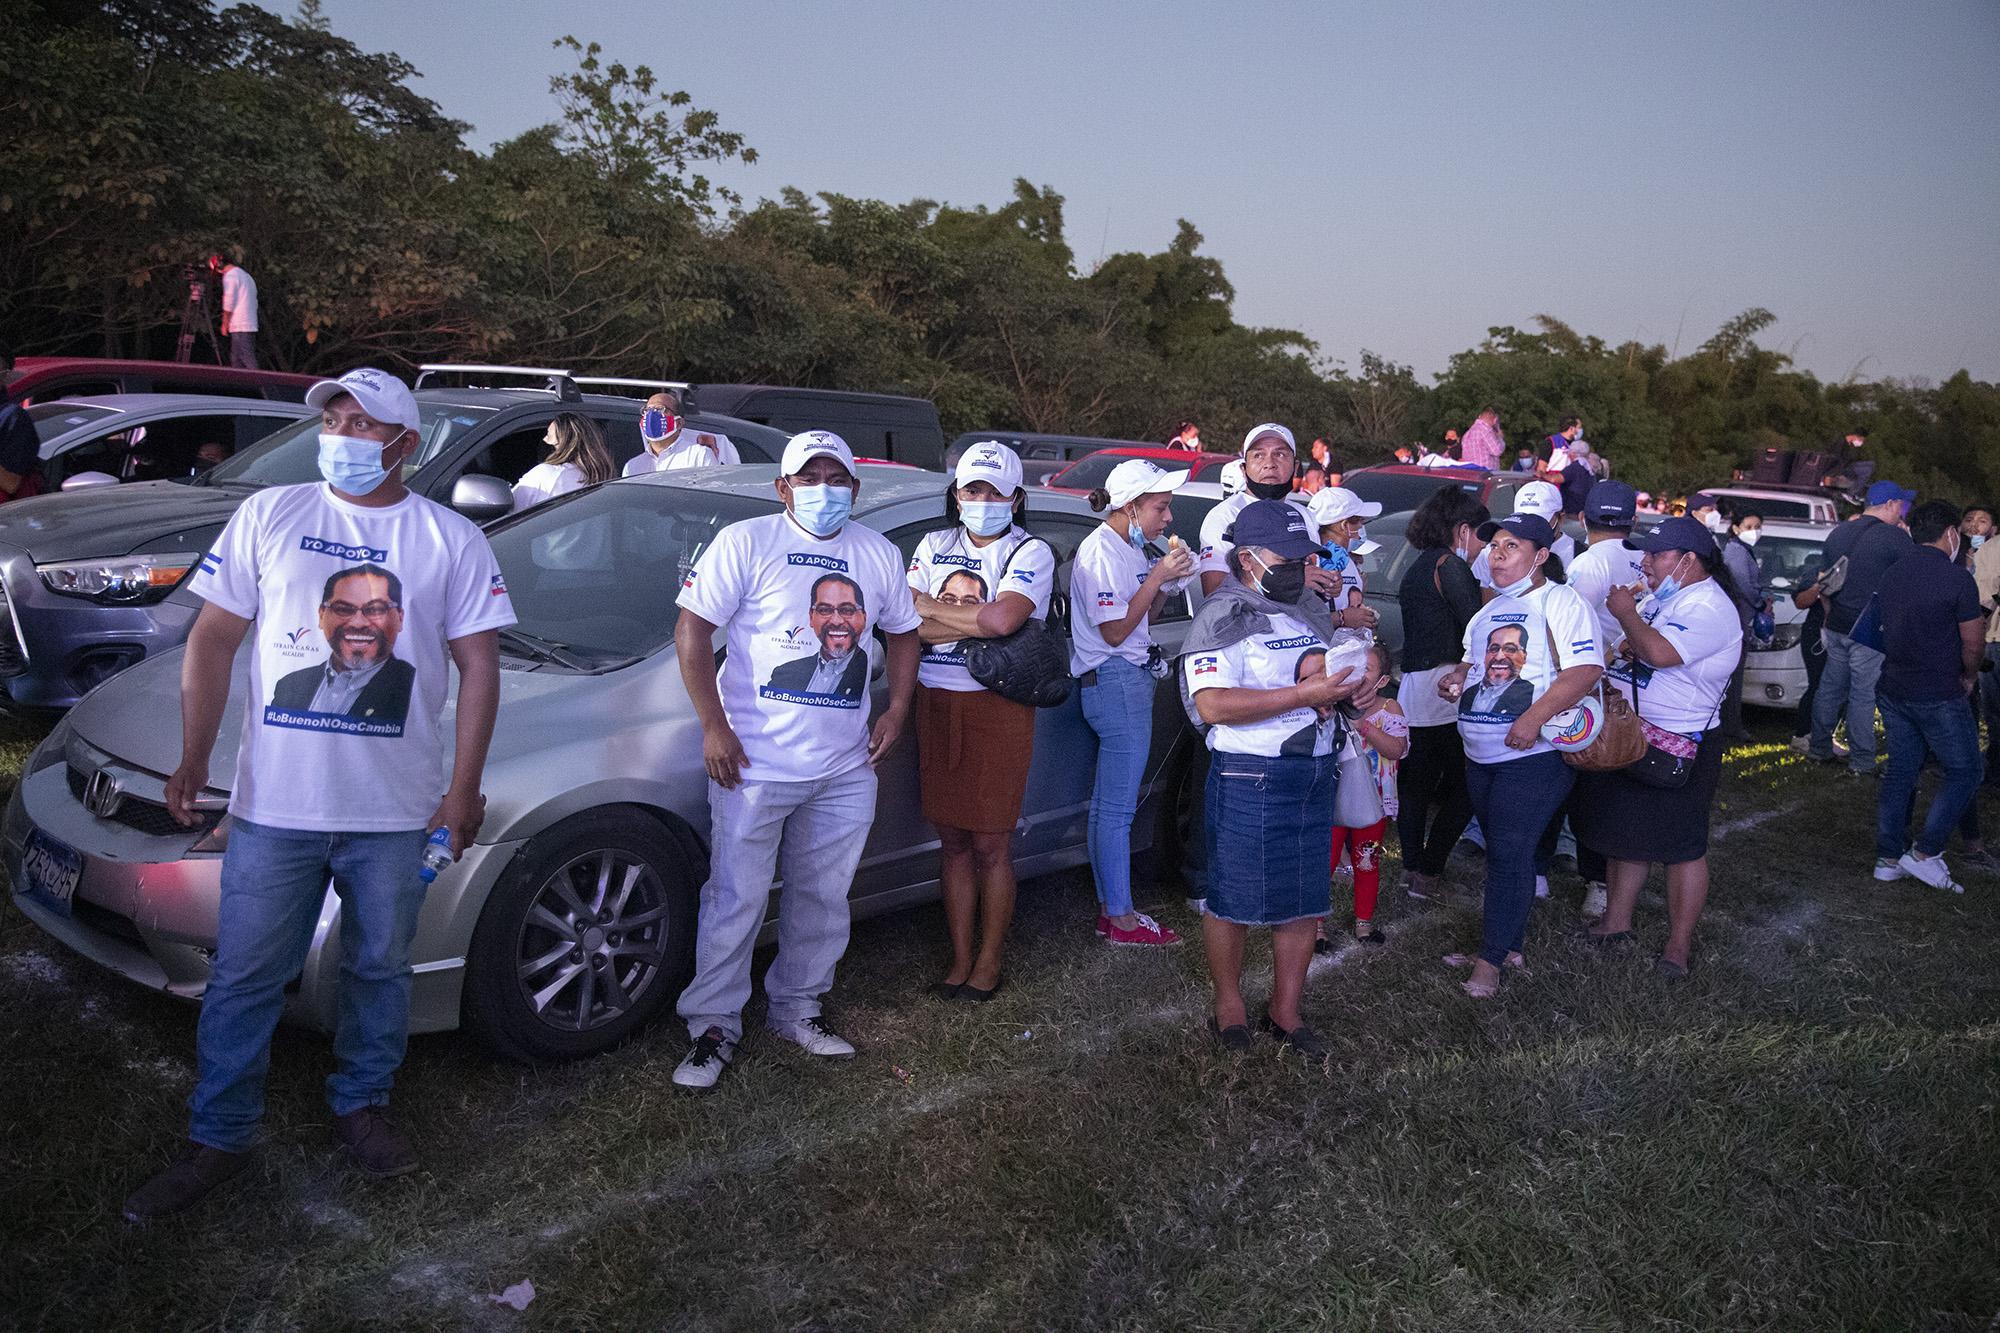 Arena planned its campaign launch to preserve social-distancing protocols among those arriving by car. Most of the attendees, though, traveled by bus and in the beds of pickup trucks. Photo: Carlos Barrera/El Faro